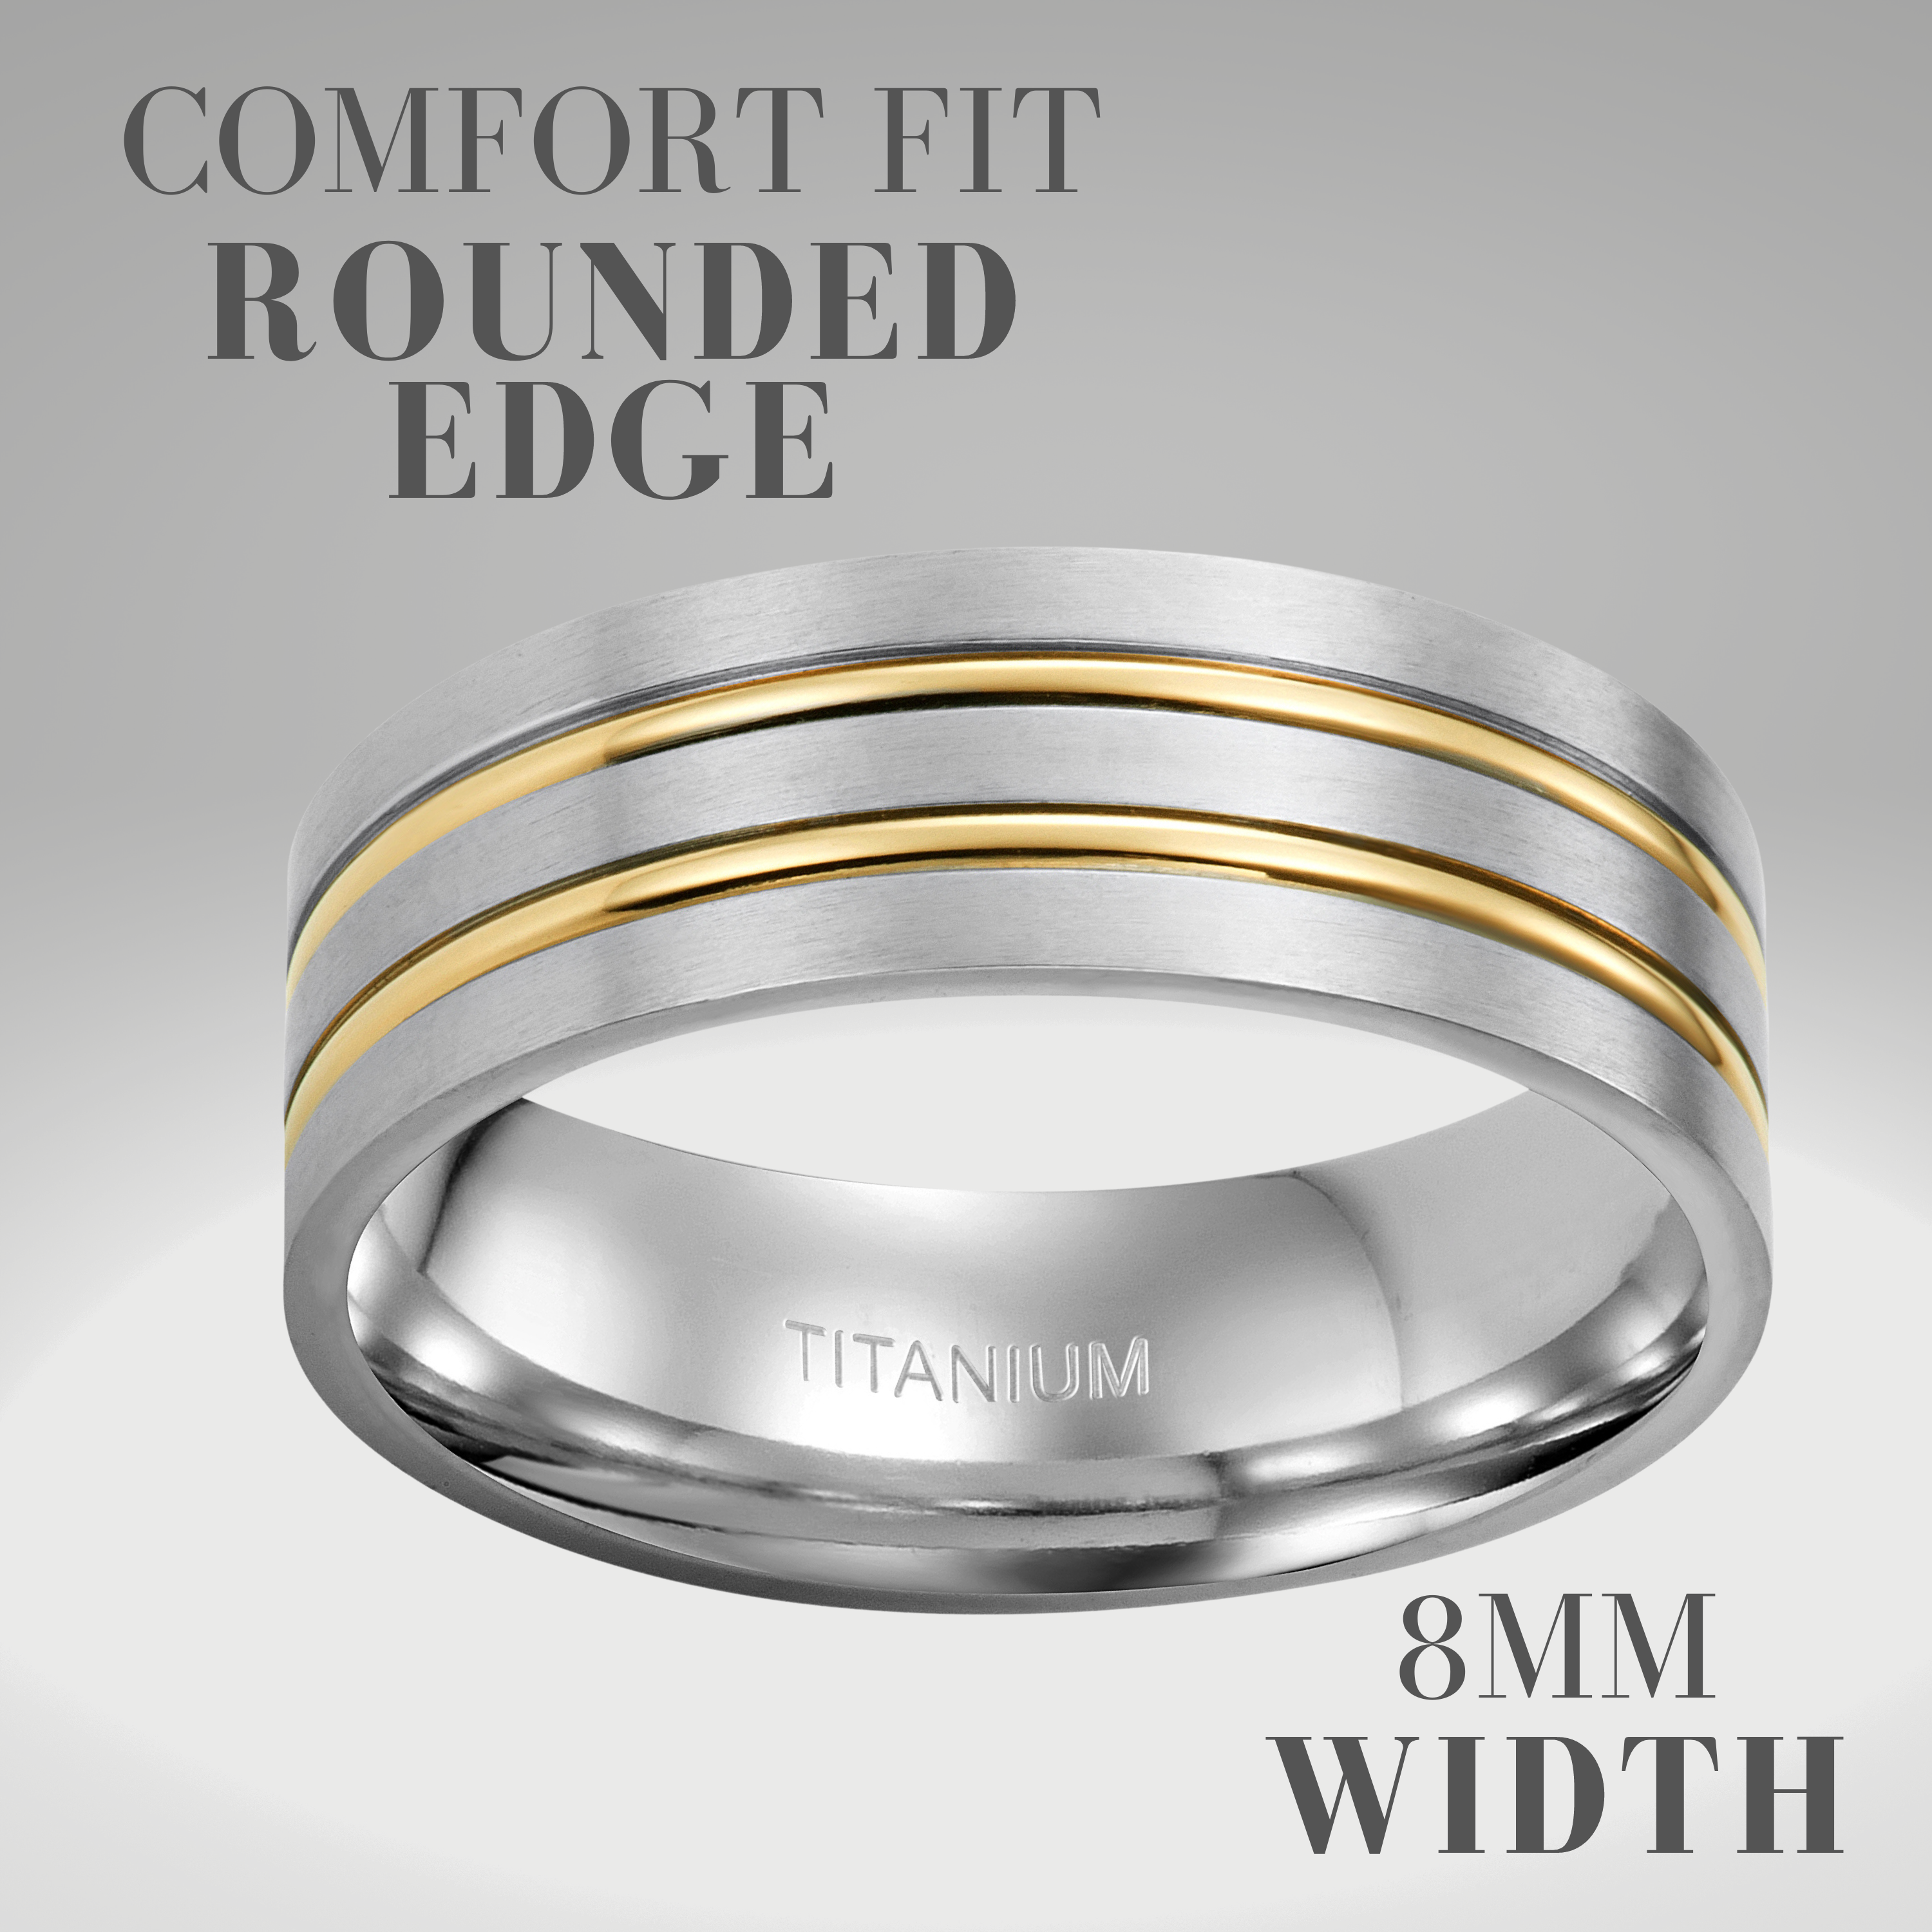 Men's Titanium Ring Two Tone Gold and Silver